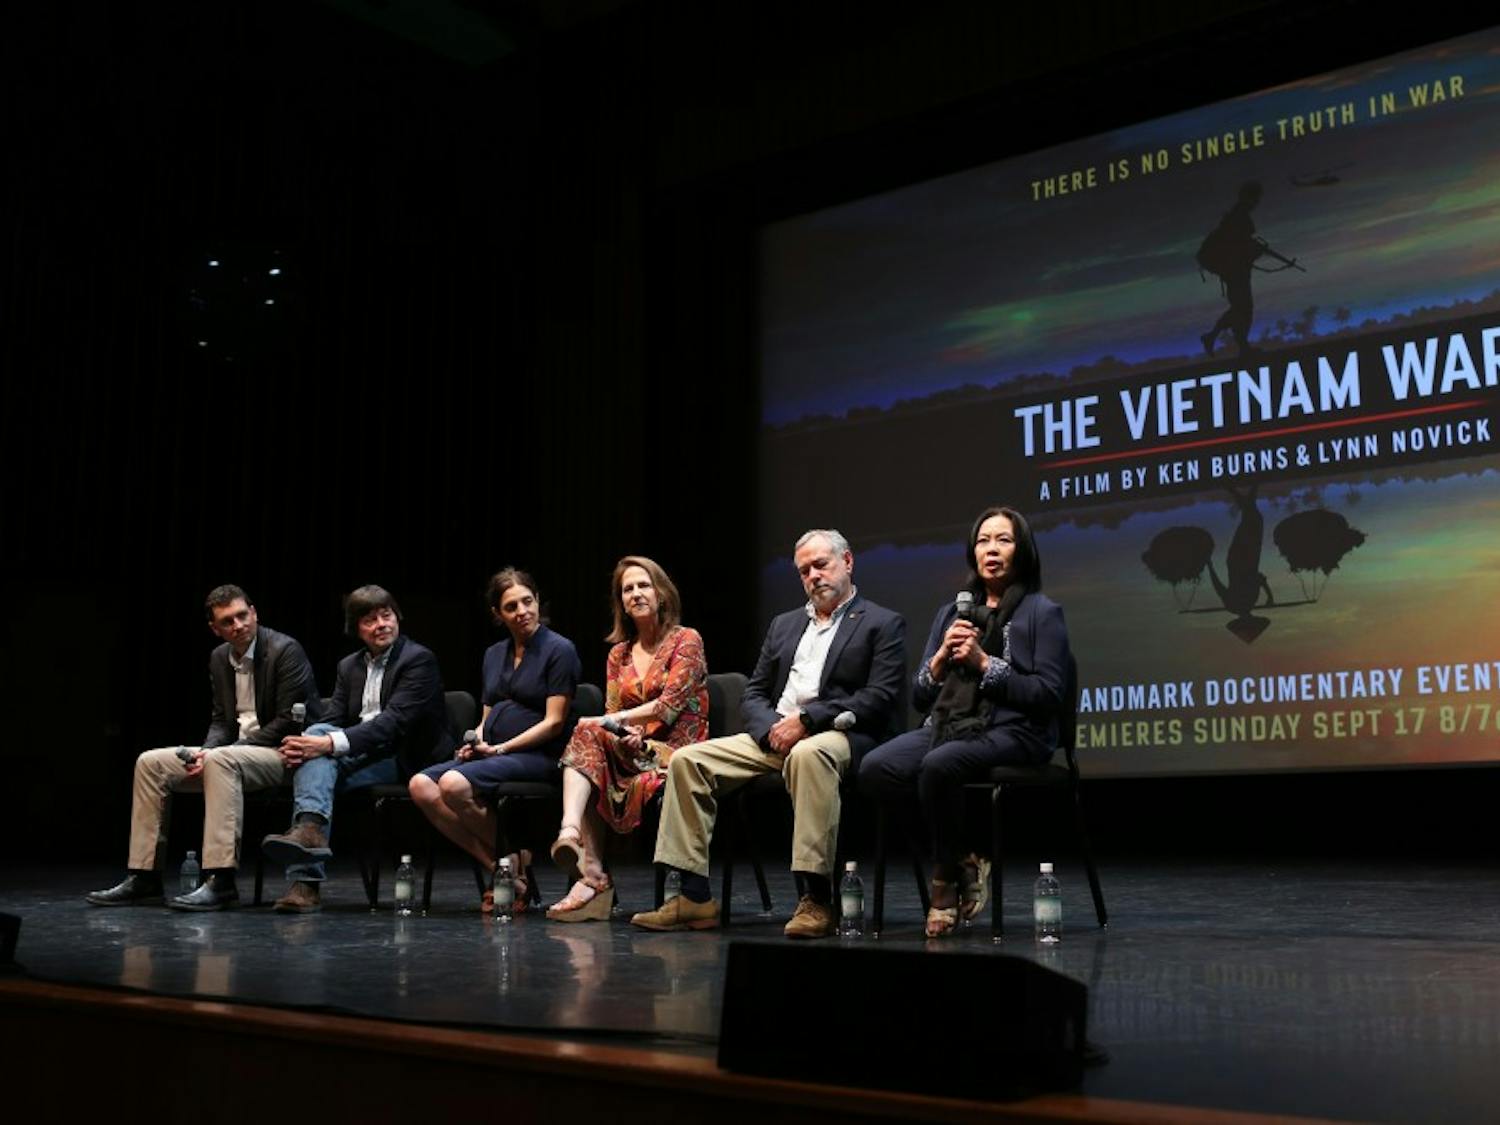 Ken Burns presents selections from The Vietnam War in Hanover, NH on Thursday, July 13, 2017.Copyright 2017 Rob Strong